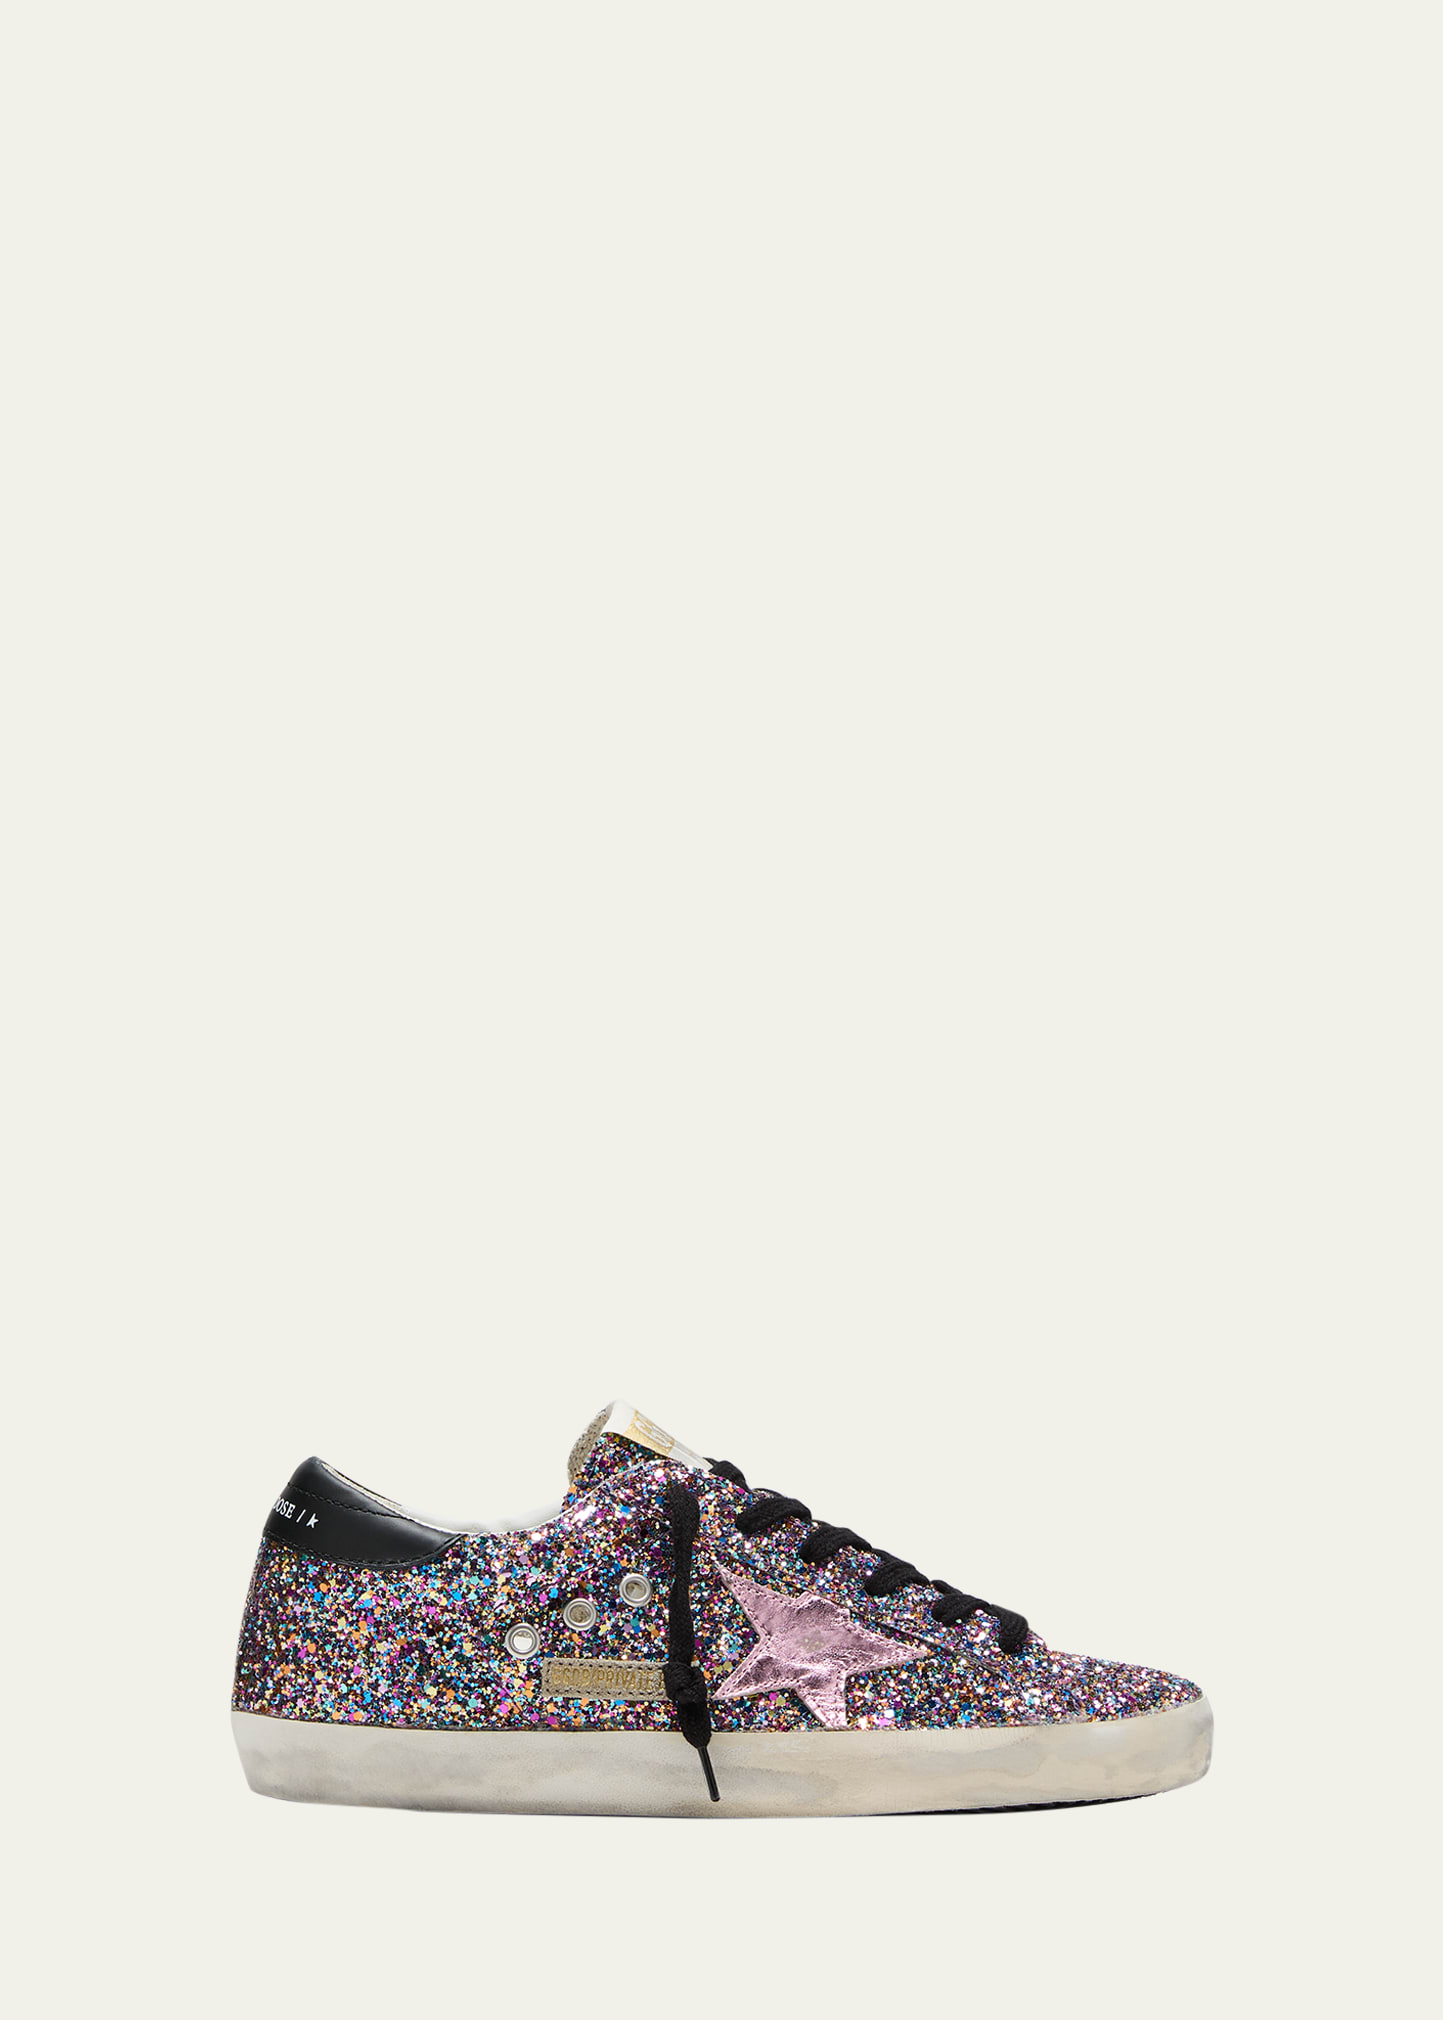 Superstar Multicolored Glitter Low-Top Sneakers